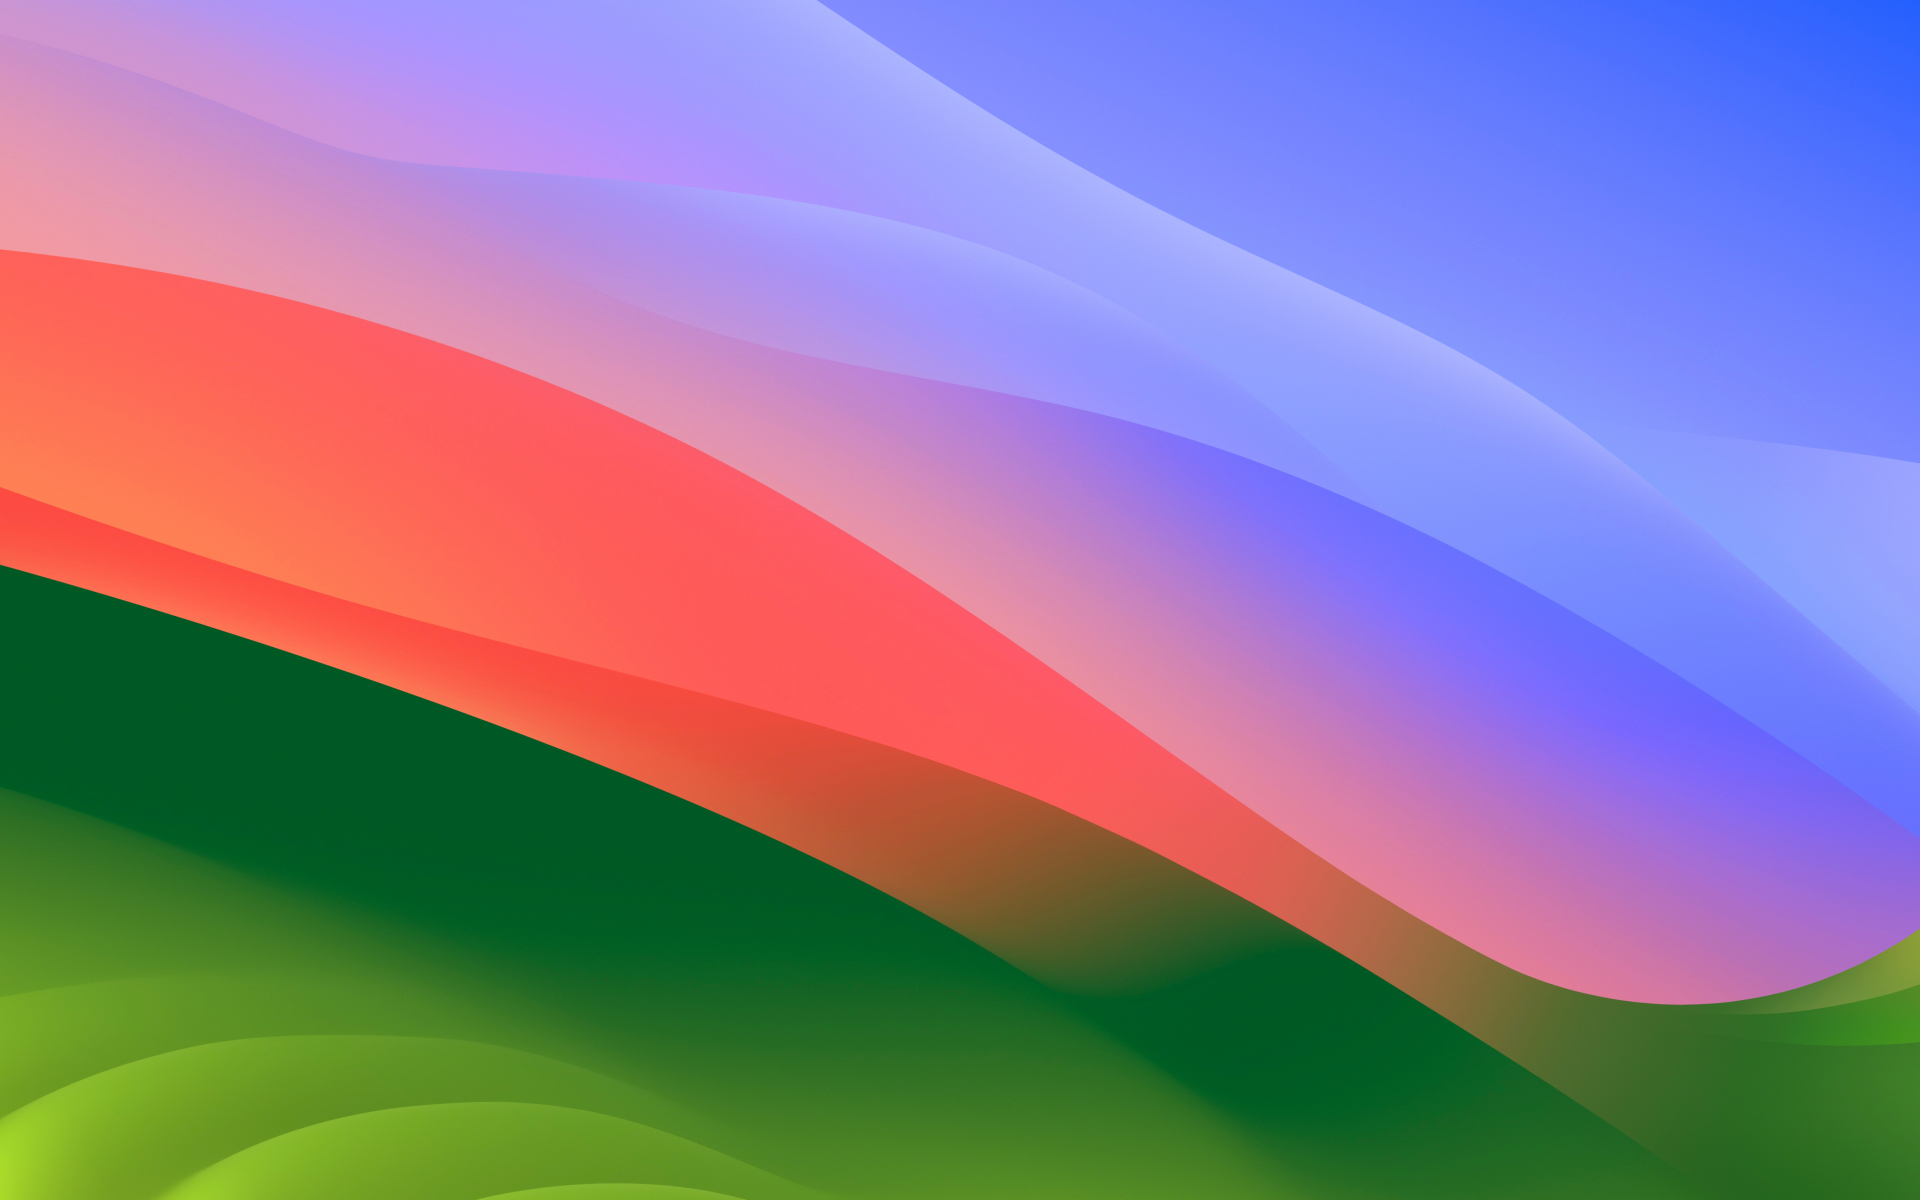 MacOS Sonoma, colorful waves, stock photo, 1920x1200 wallpaper